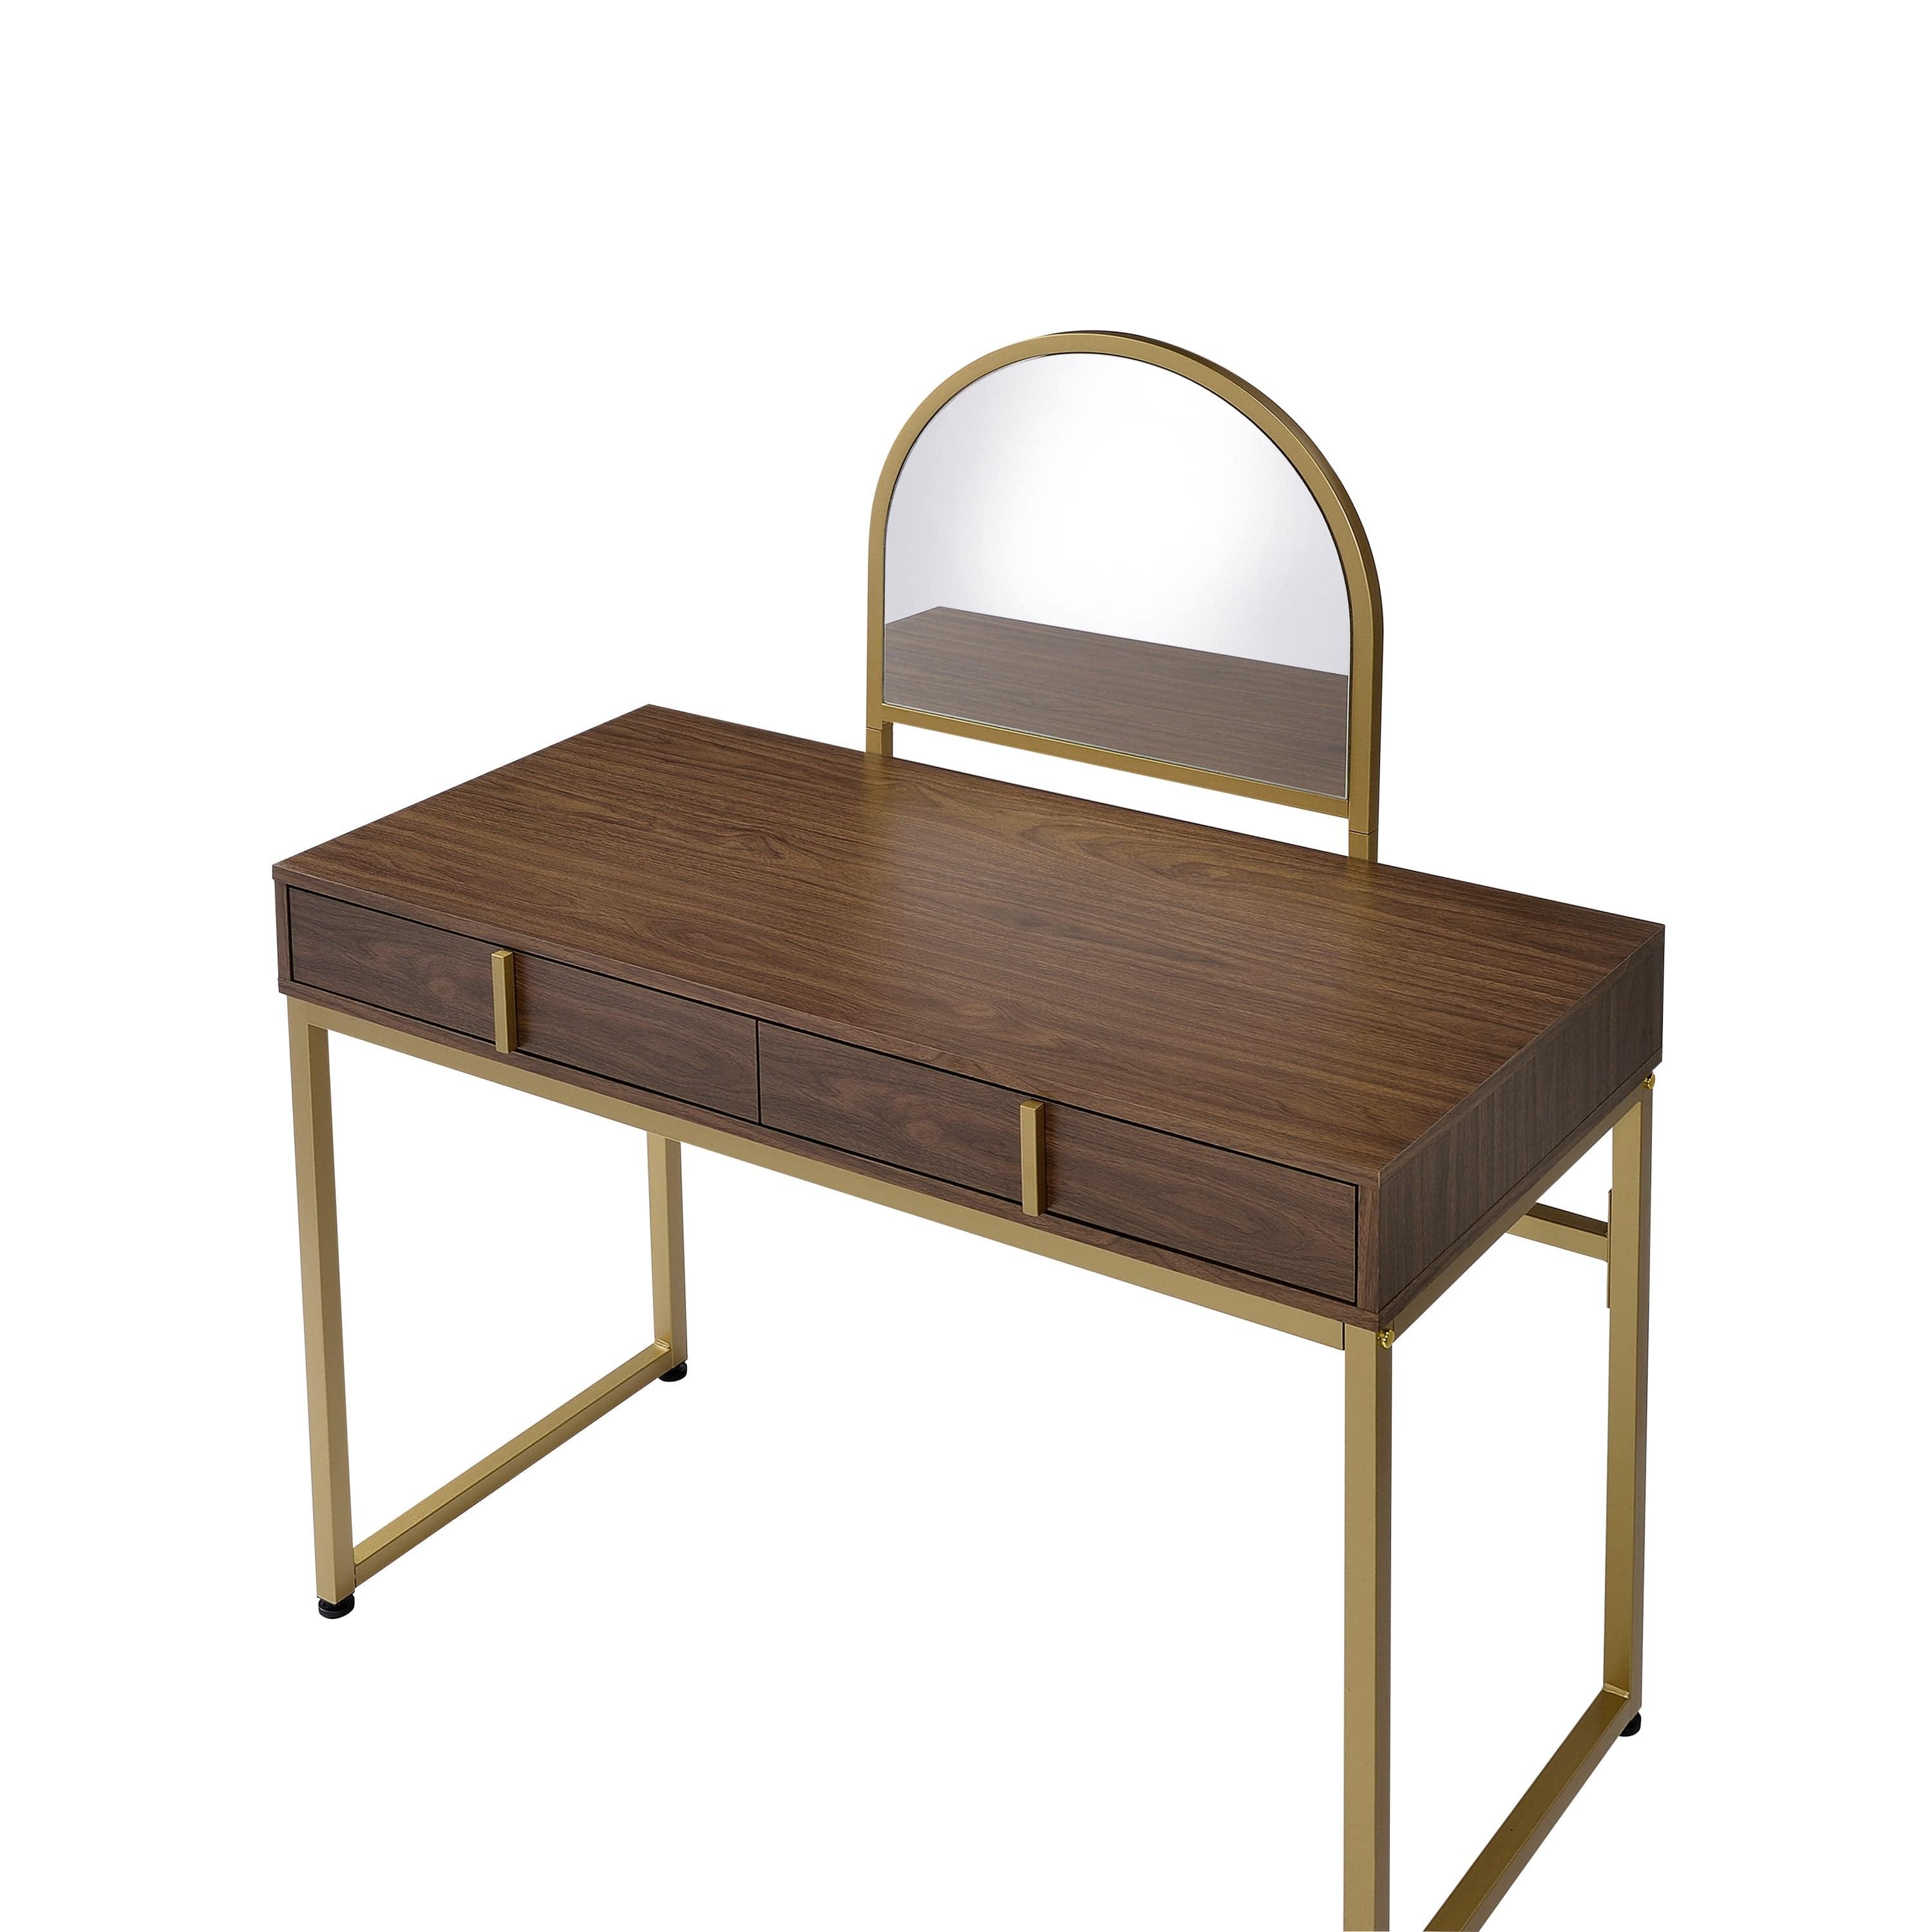 Shop ACME Coleen Vanity Desk w/Mirror & Jewelry Tray in Walnut & Gold Finish AC00670 Mademoiselle Home Decor